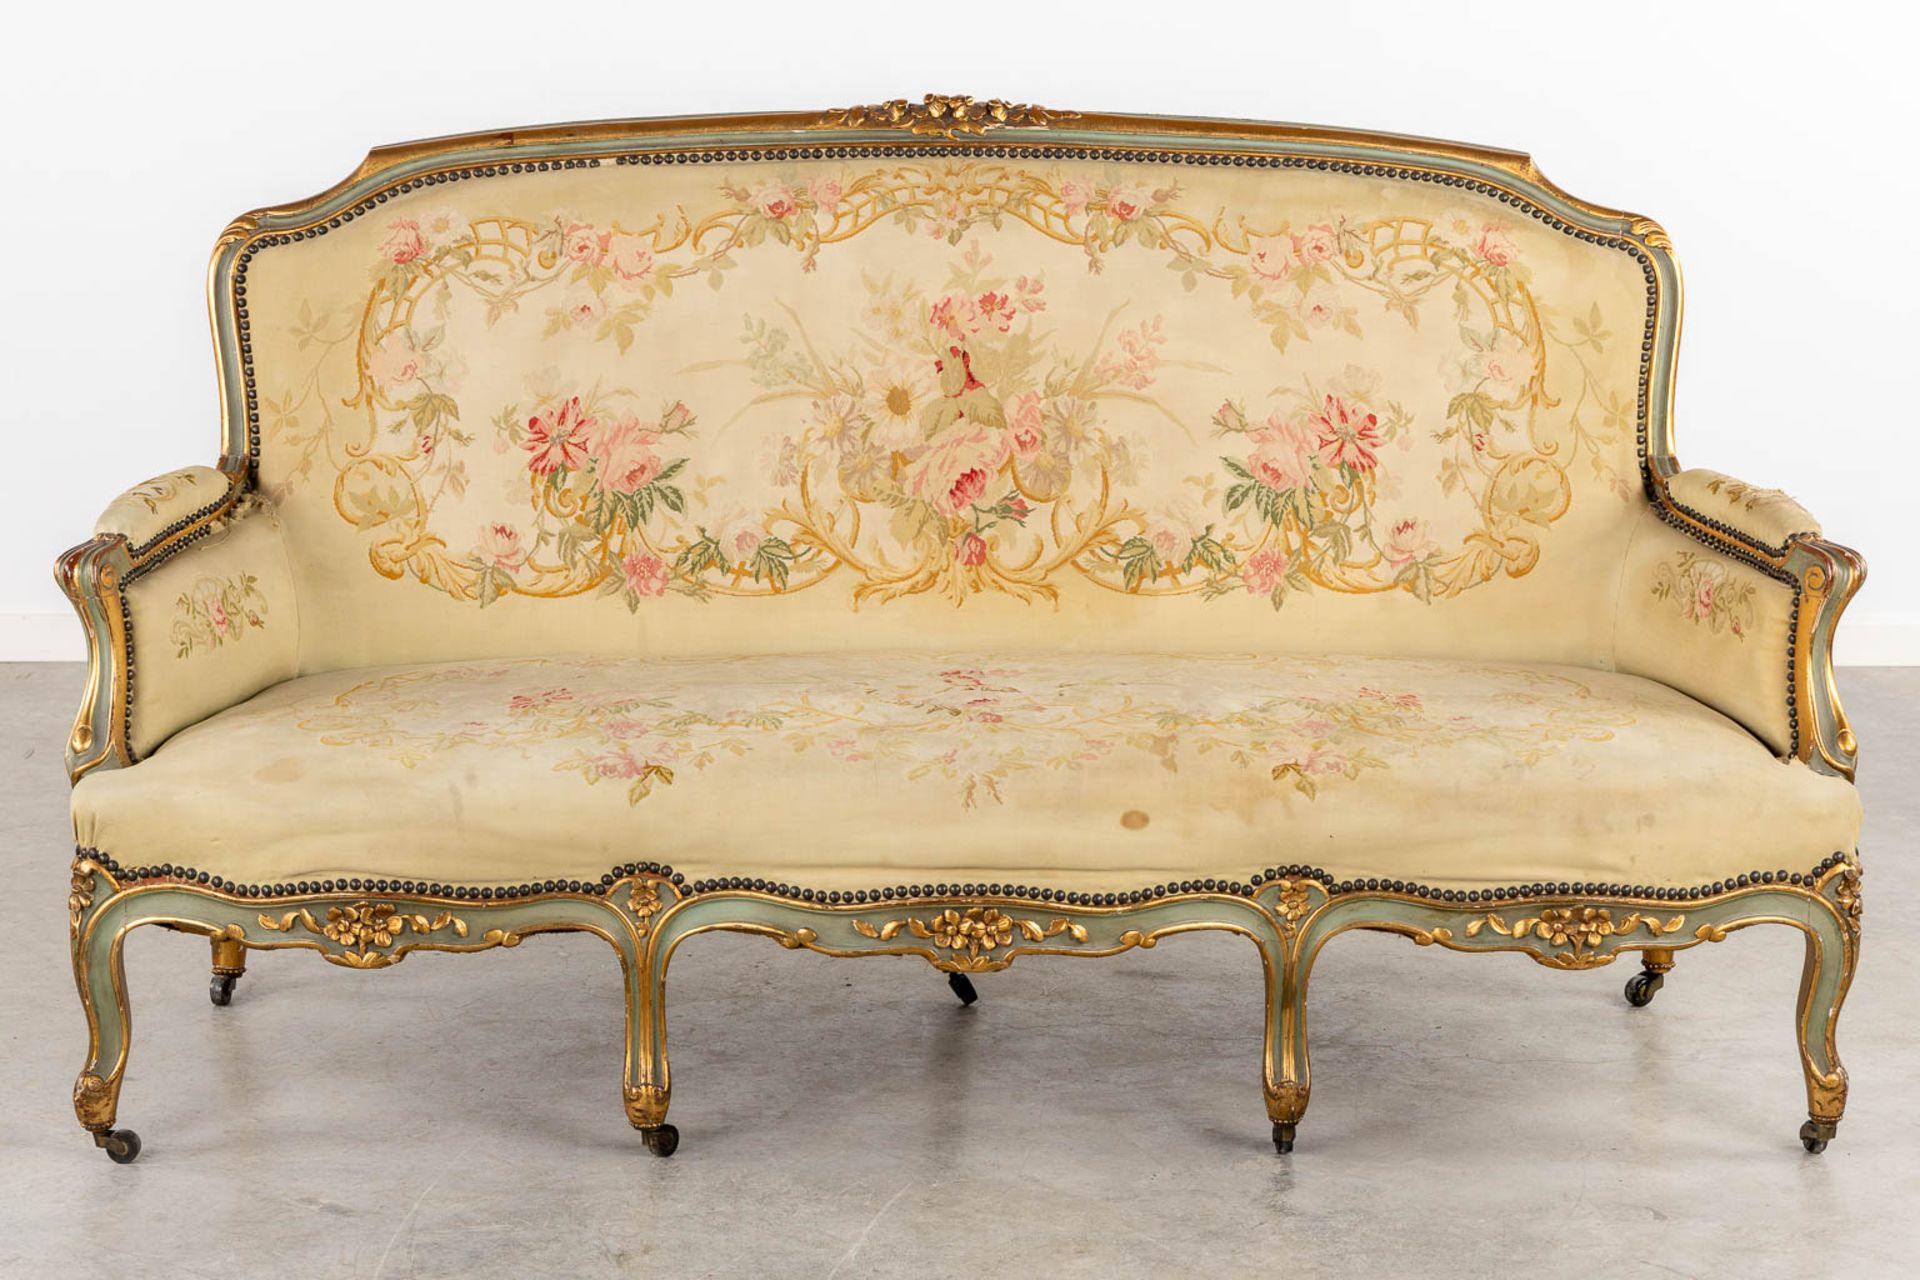 A Louis XV style sofa, upholstered with flower embroideries. (L:80 x W:175 x H:96 cm) - Image 3 of 11